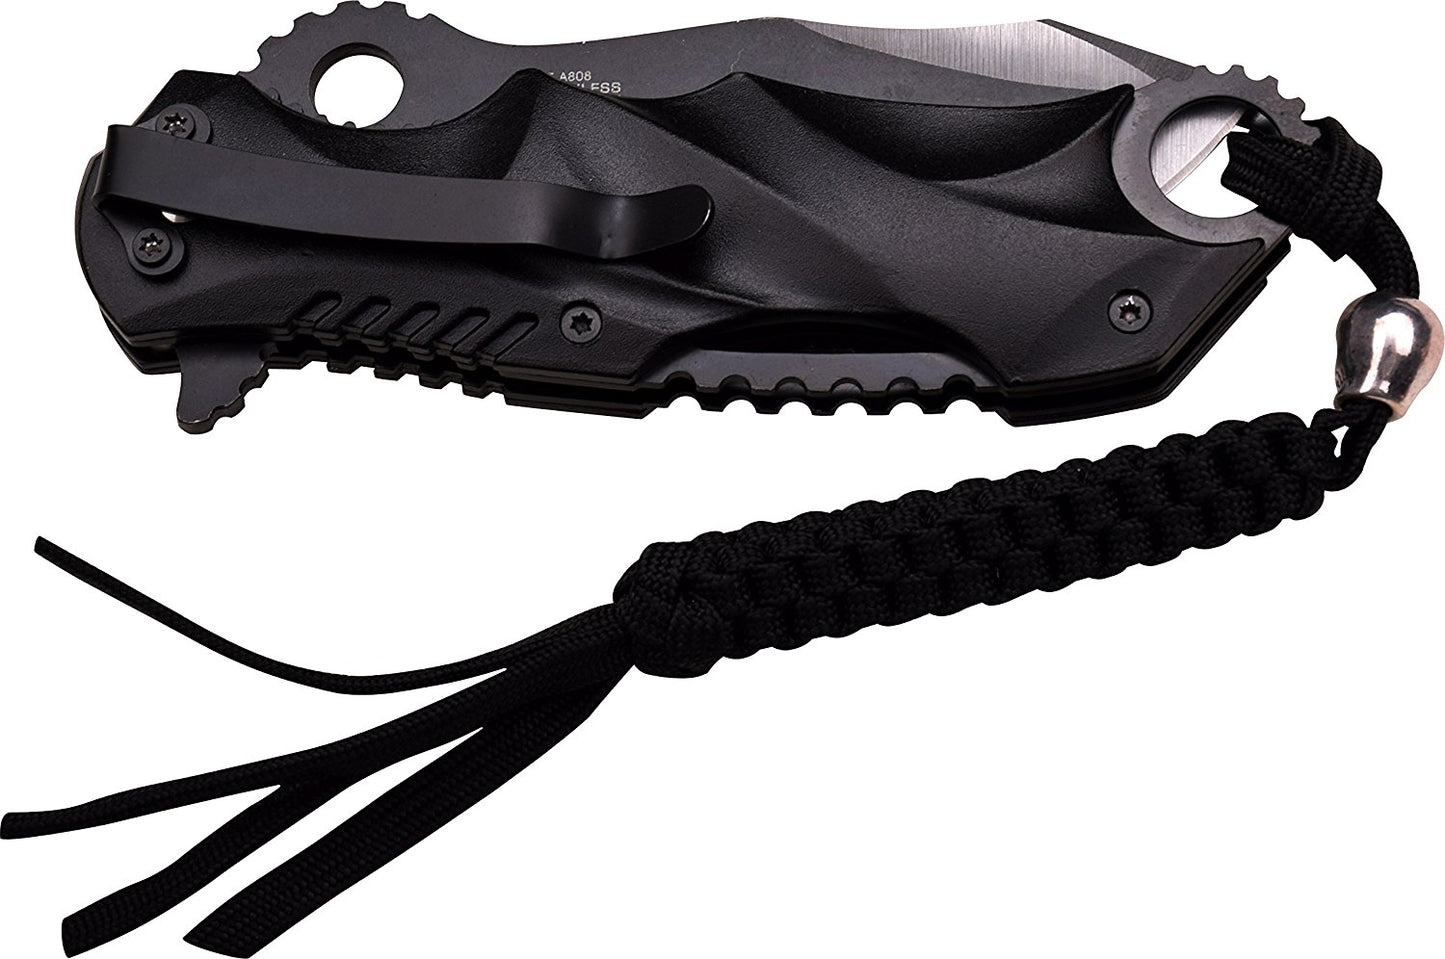 MTech USA MT-A808 Series Assisted Opening Folding Knife, Two-Tone Half-Serrated Blade, 4-3/4-Inch Closed